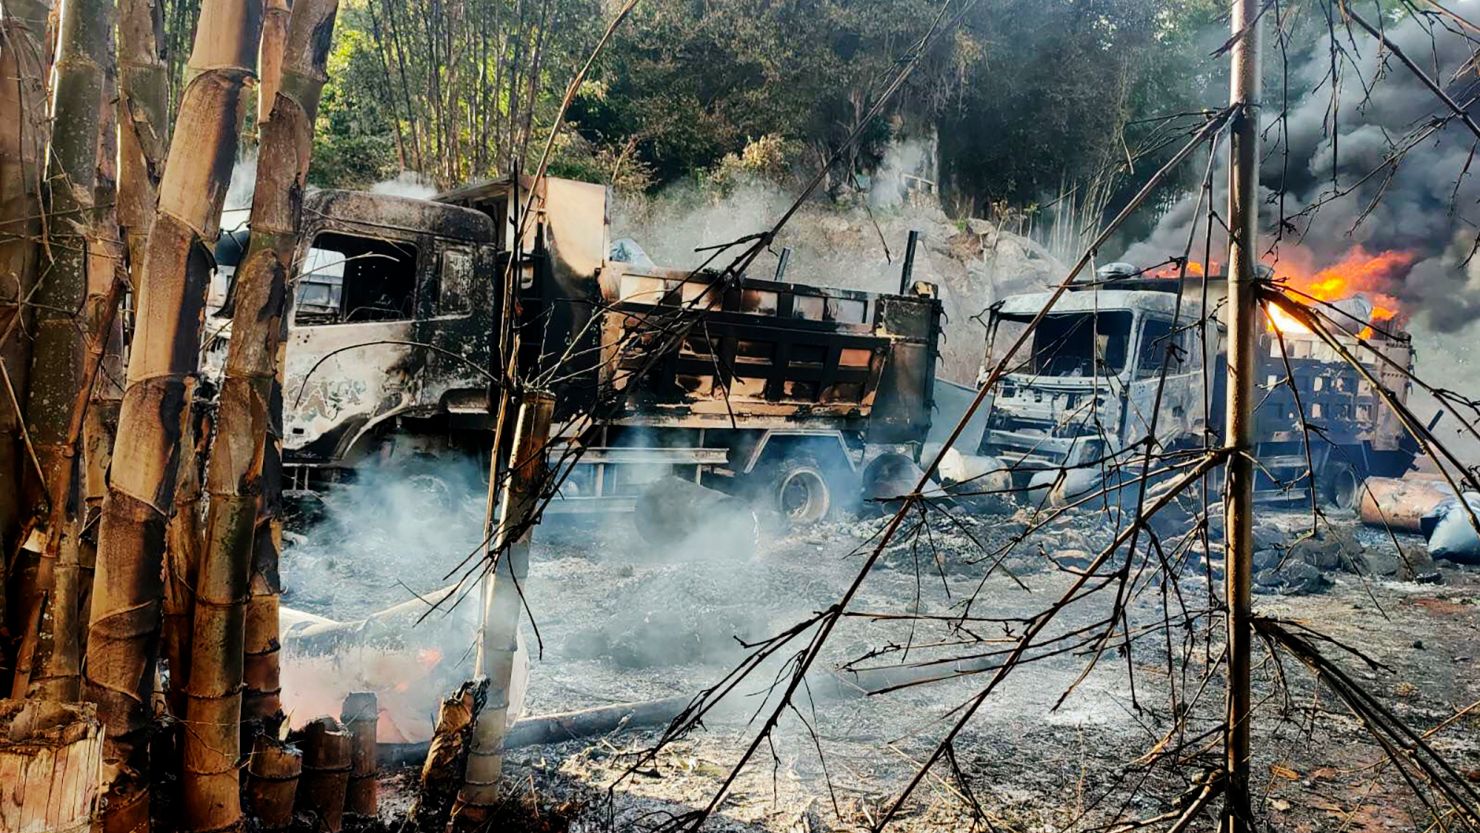 Smoke and flames rise from burnt out vehicles in Hpruso township, Myanmar, on December 24.